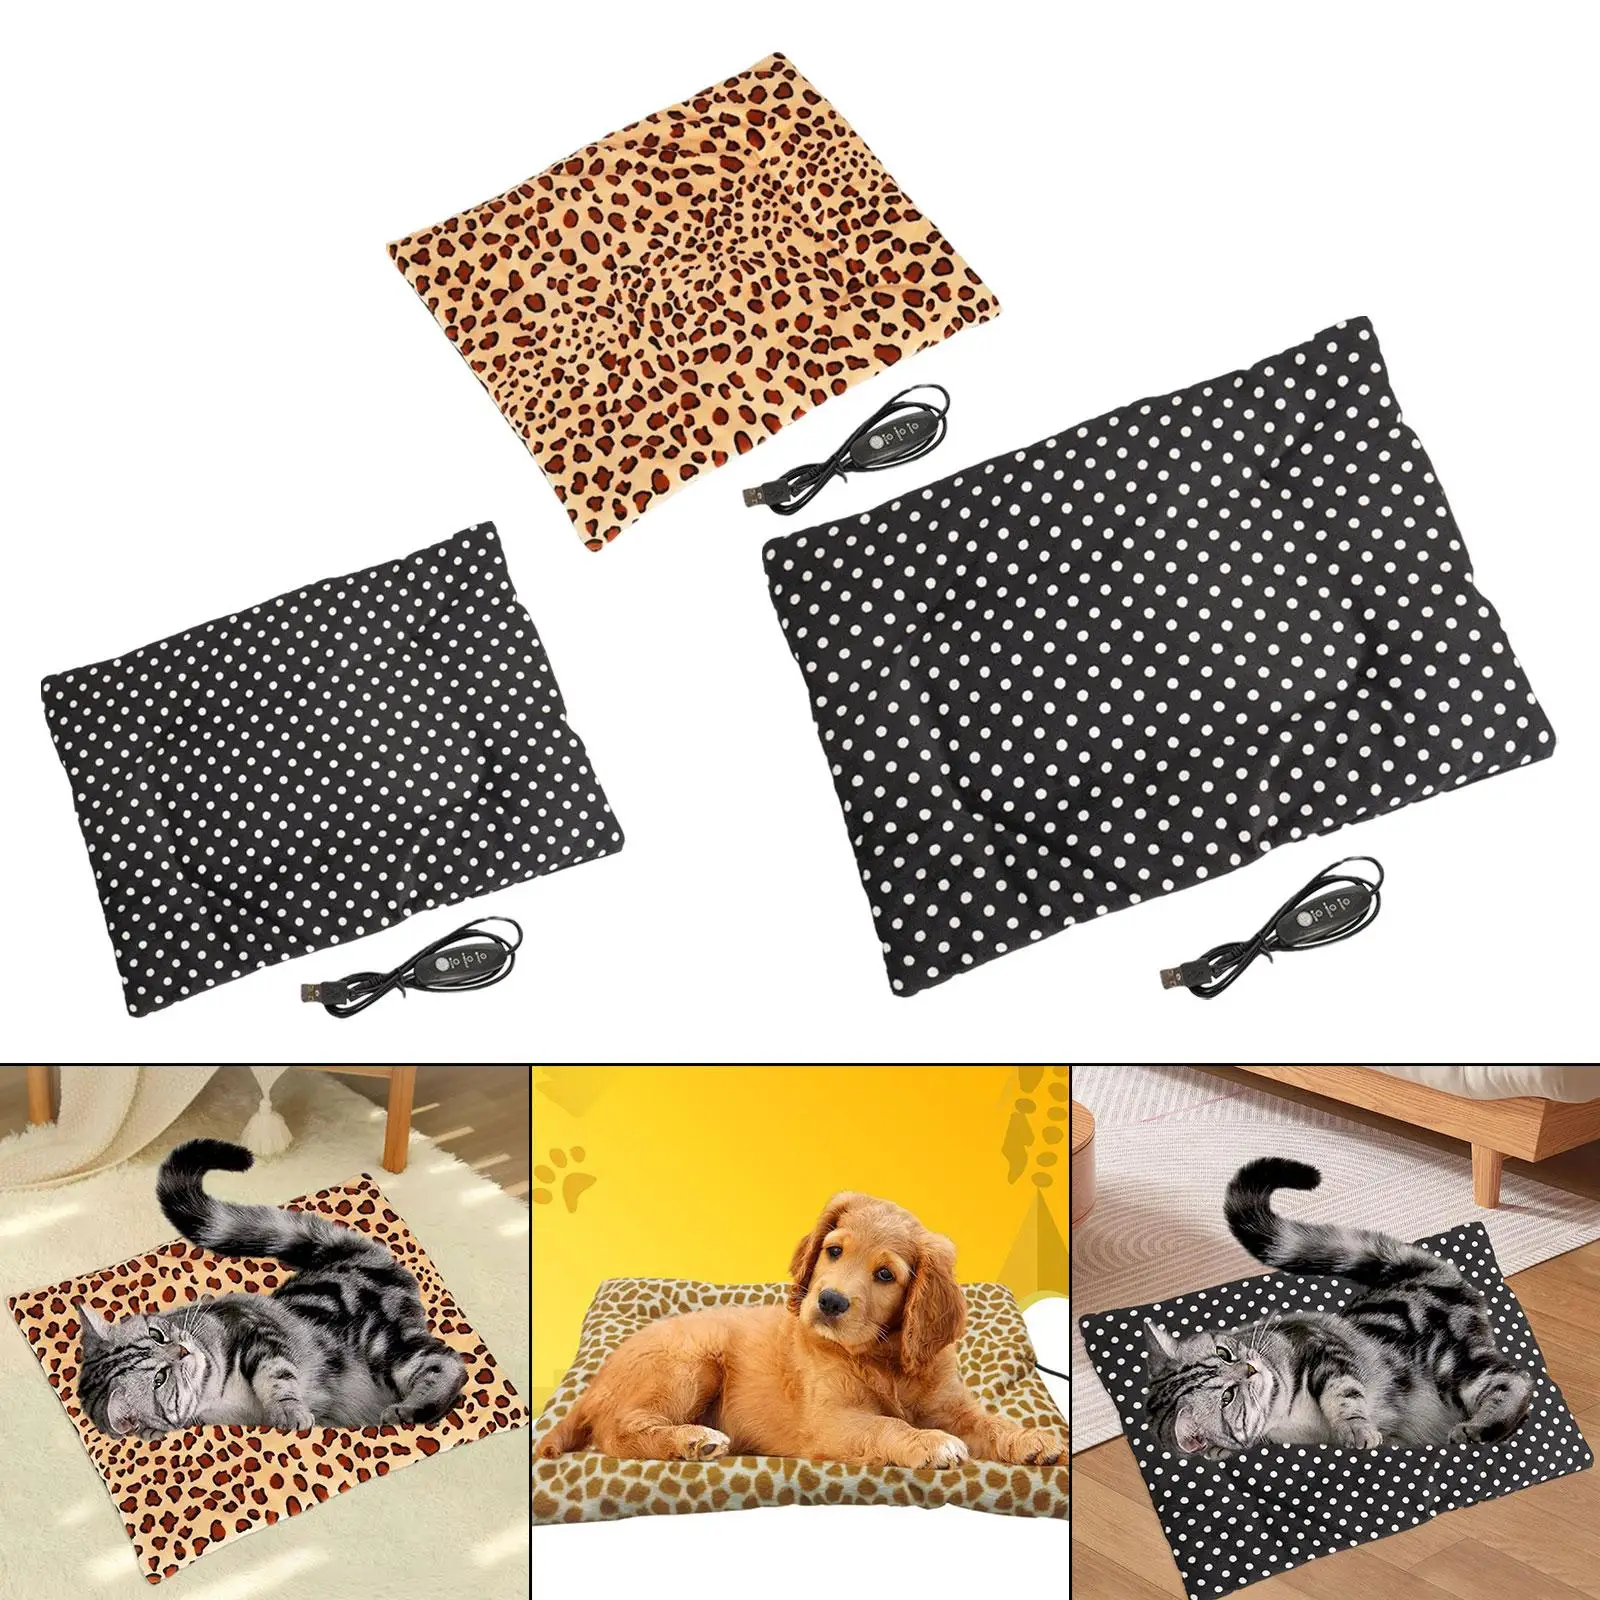 Pet Heating Pads Adjustable Temperature Thermal Pad Winter Warm Pet Heated Mat Cats Dogs Warmer Bed for Resting Sleeping Kitty